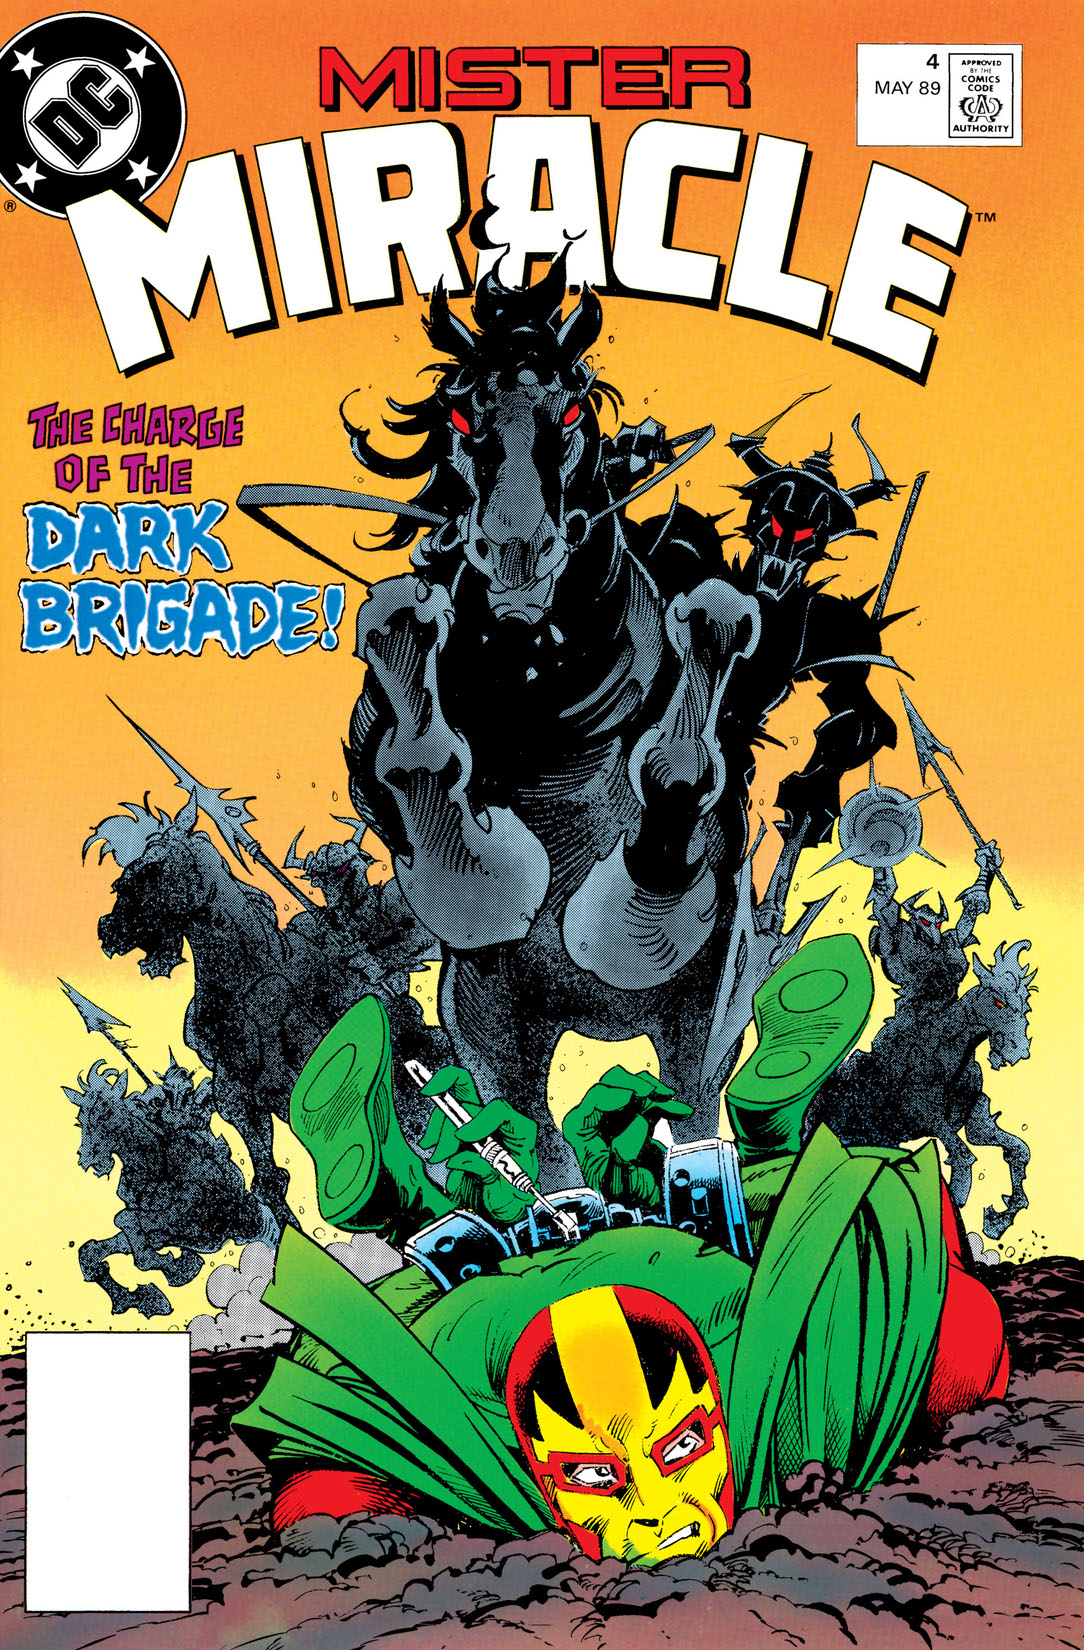 Mister Miracle (1988-) #4 preview images